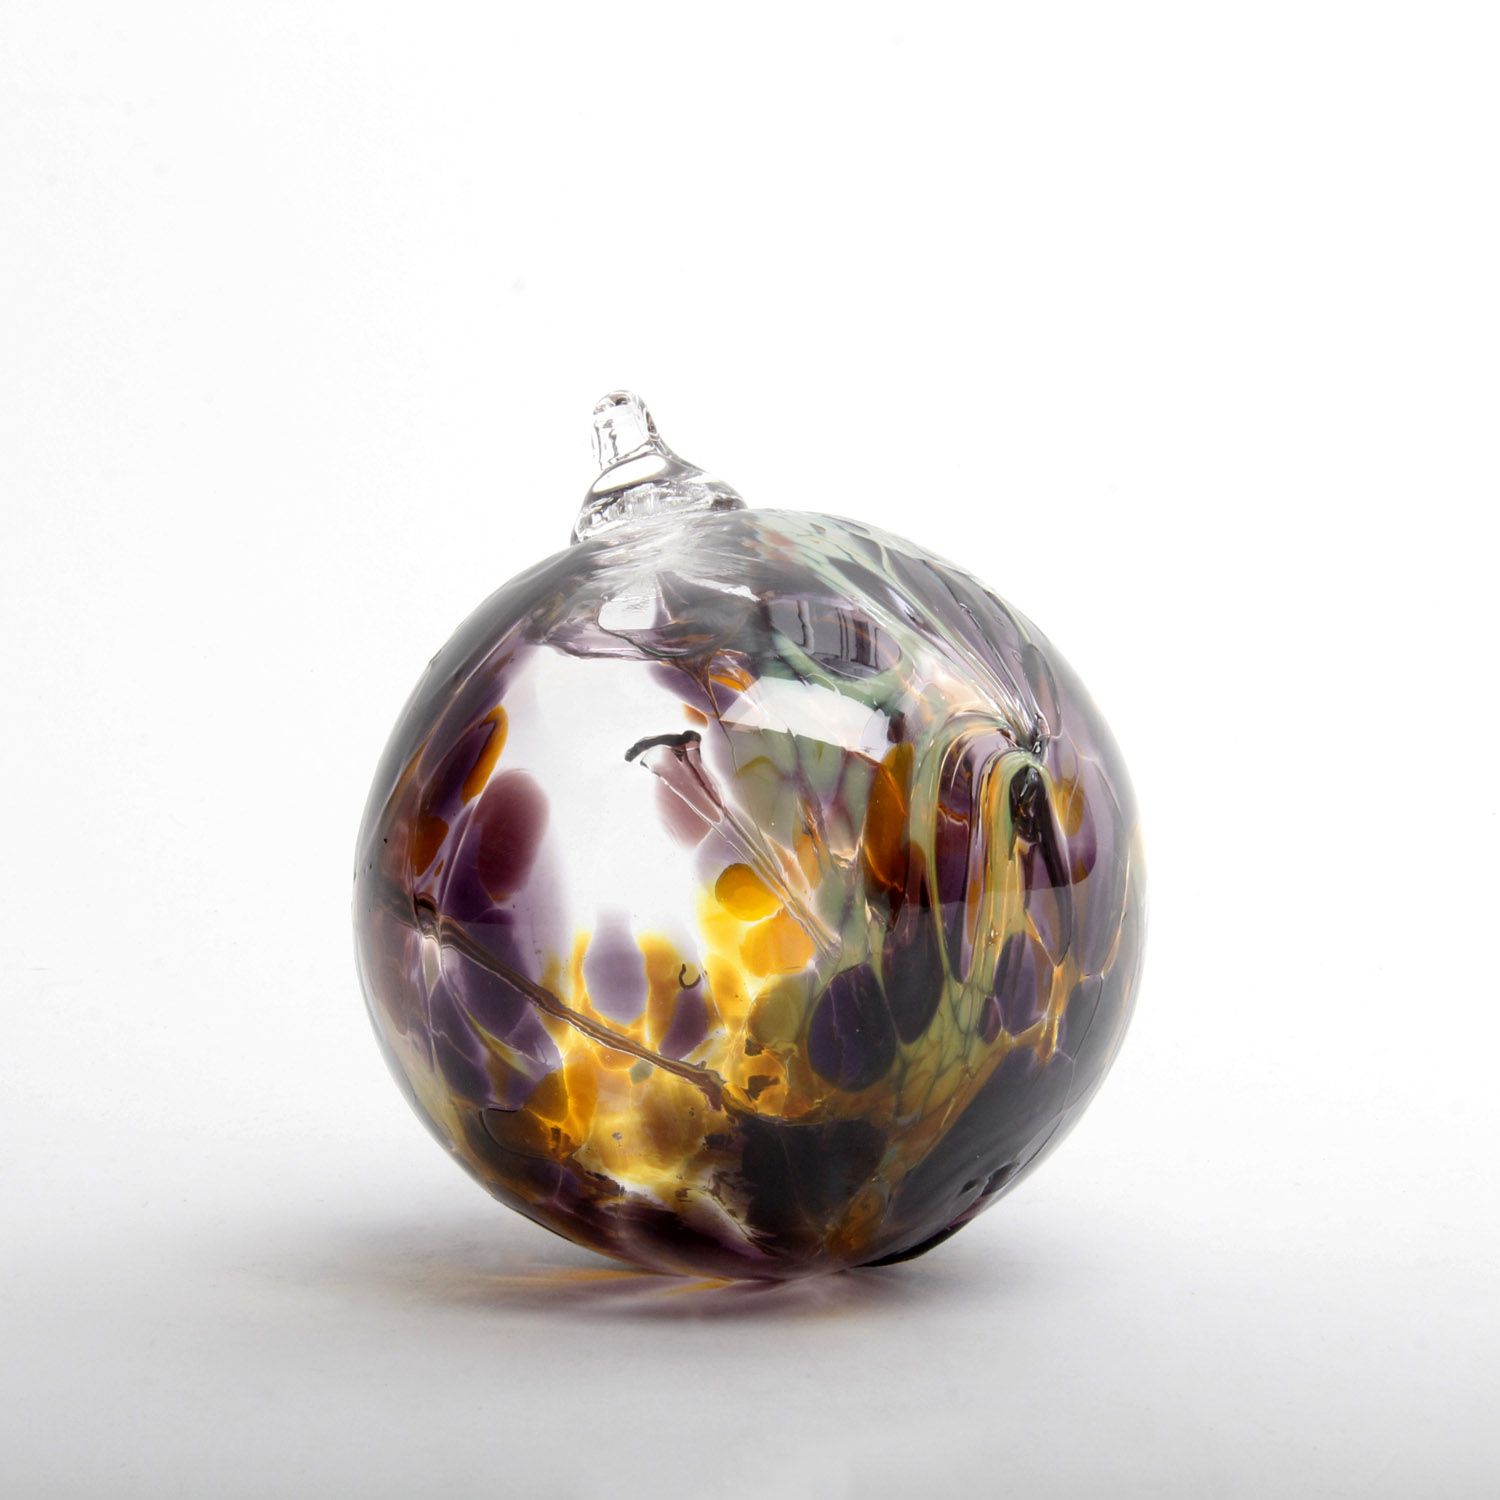 Gordon Boyd: Small Witchball – Elderberry Product Image 3 of 3